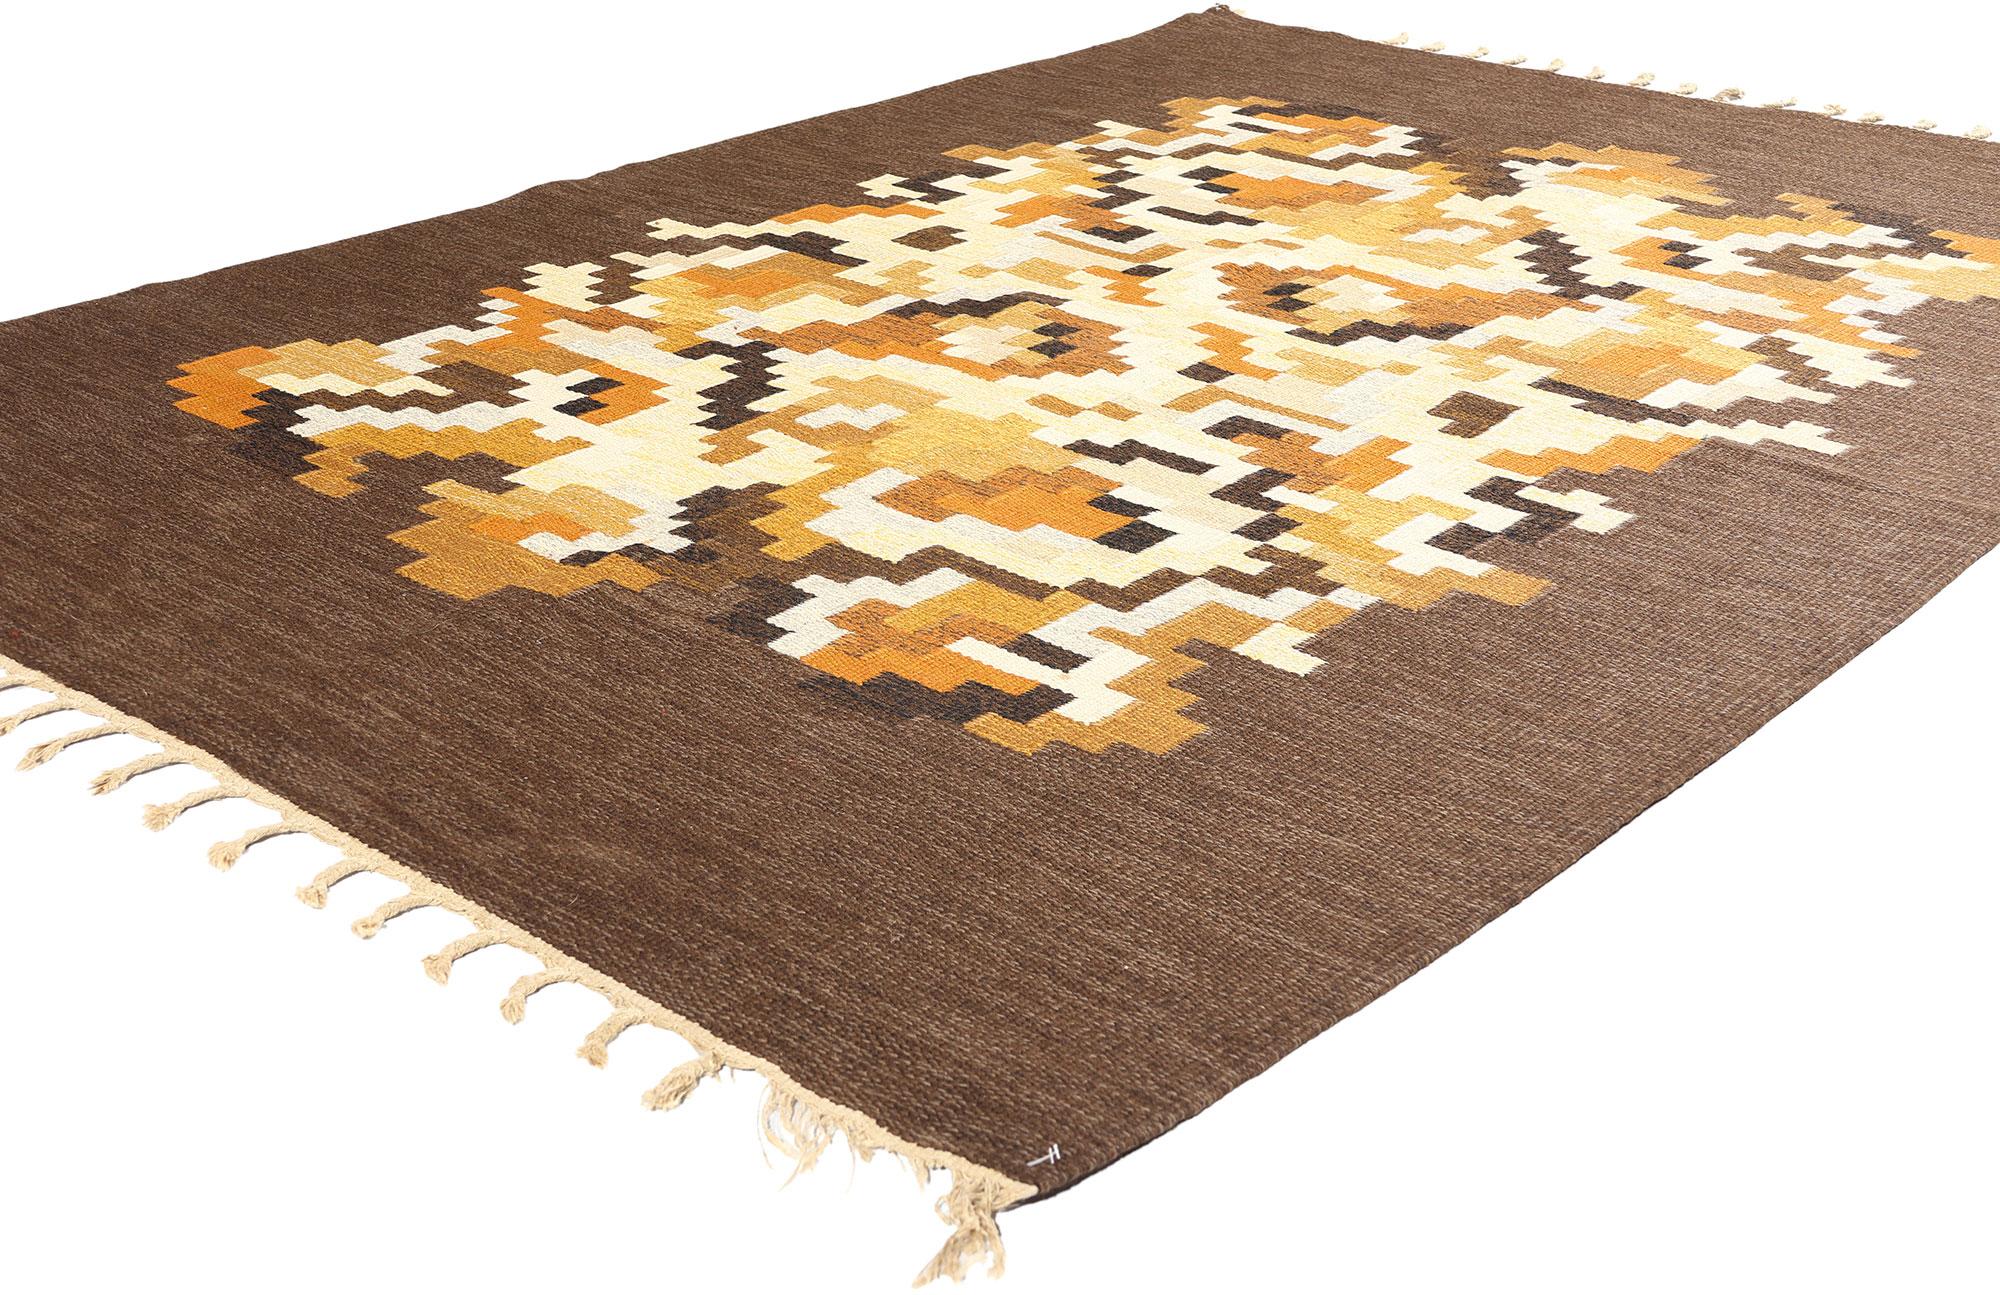 78249 Erik Lundberg Vintage Swedish Kilim Rollakan Rug, 05'06 x 08'00. Erik Lundberg, a Swedish weaver behind the firm Vavaregarden, which translates to Weavers Farm, employed local weavers in Malmo during the 1960s to produce hand-woven flat-weave